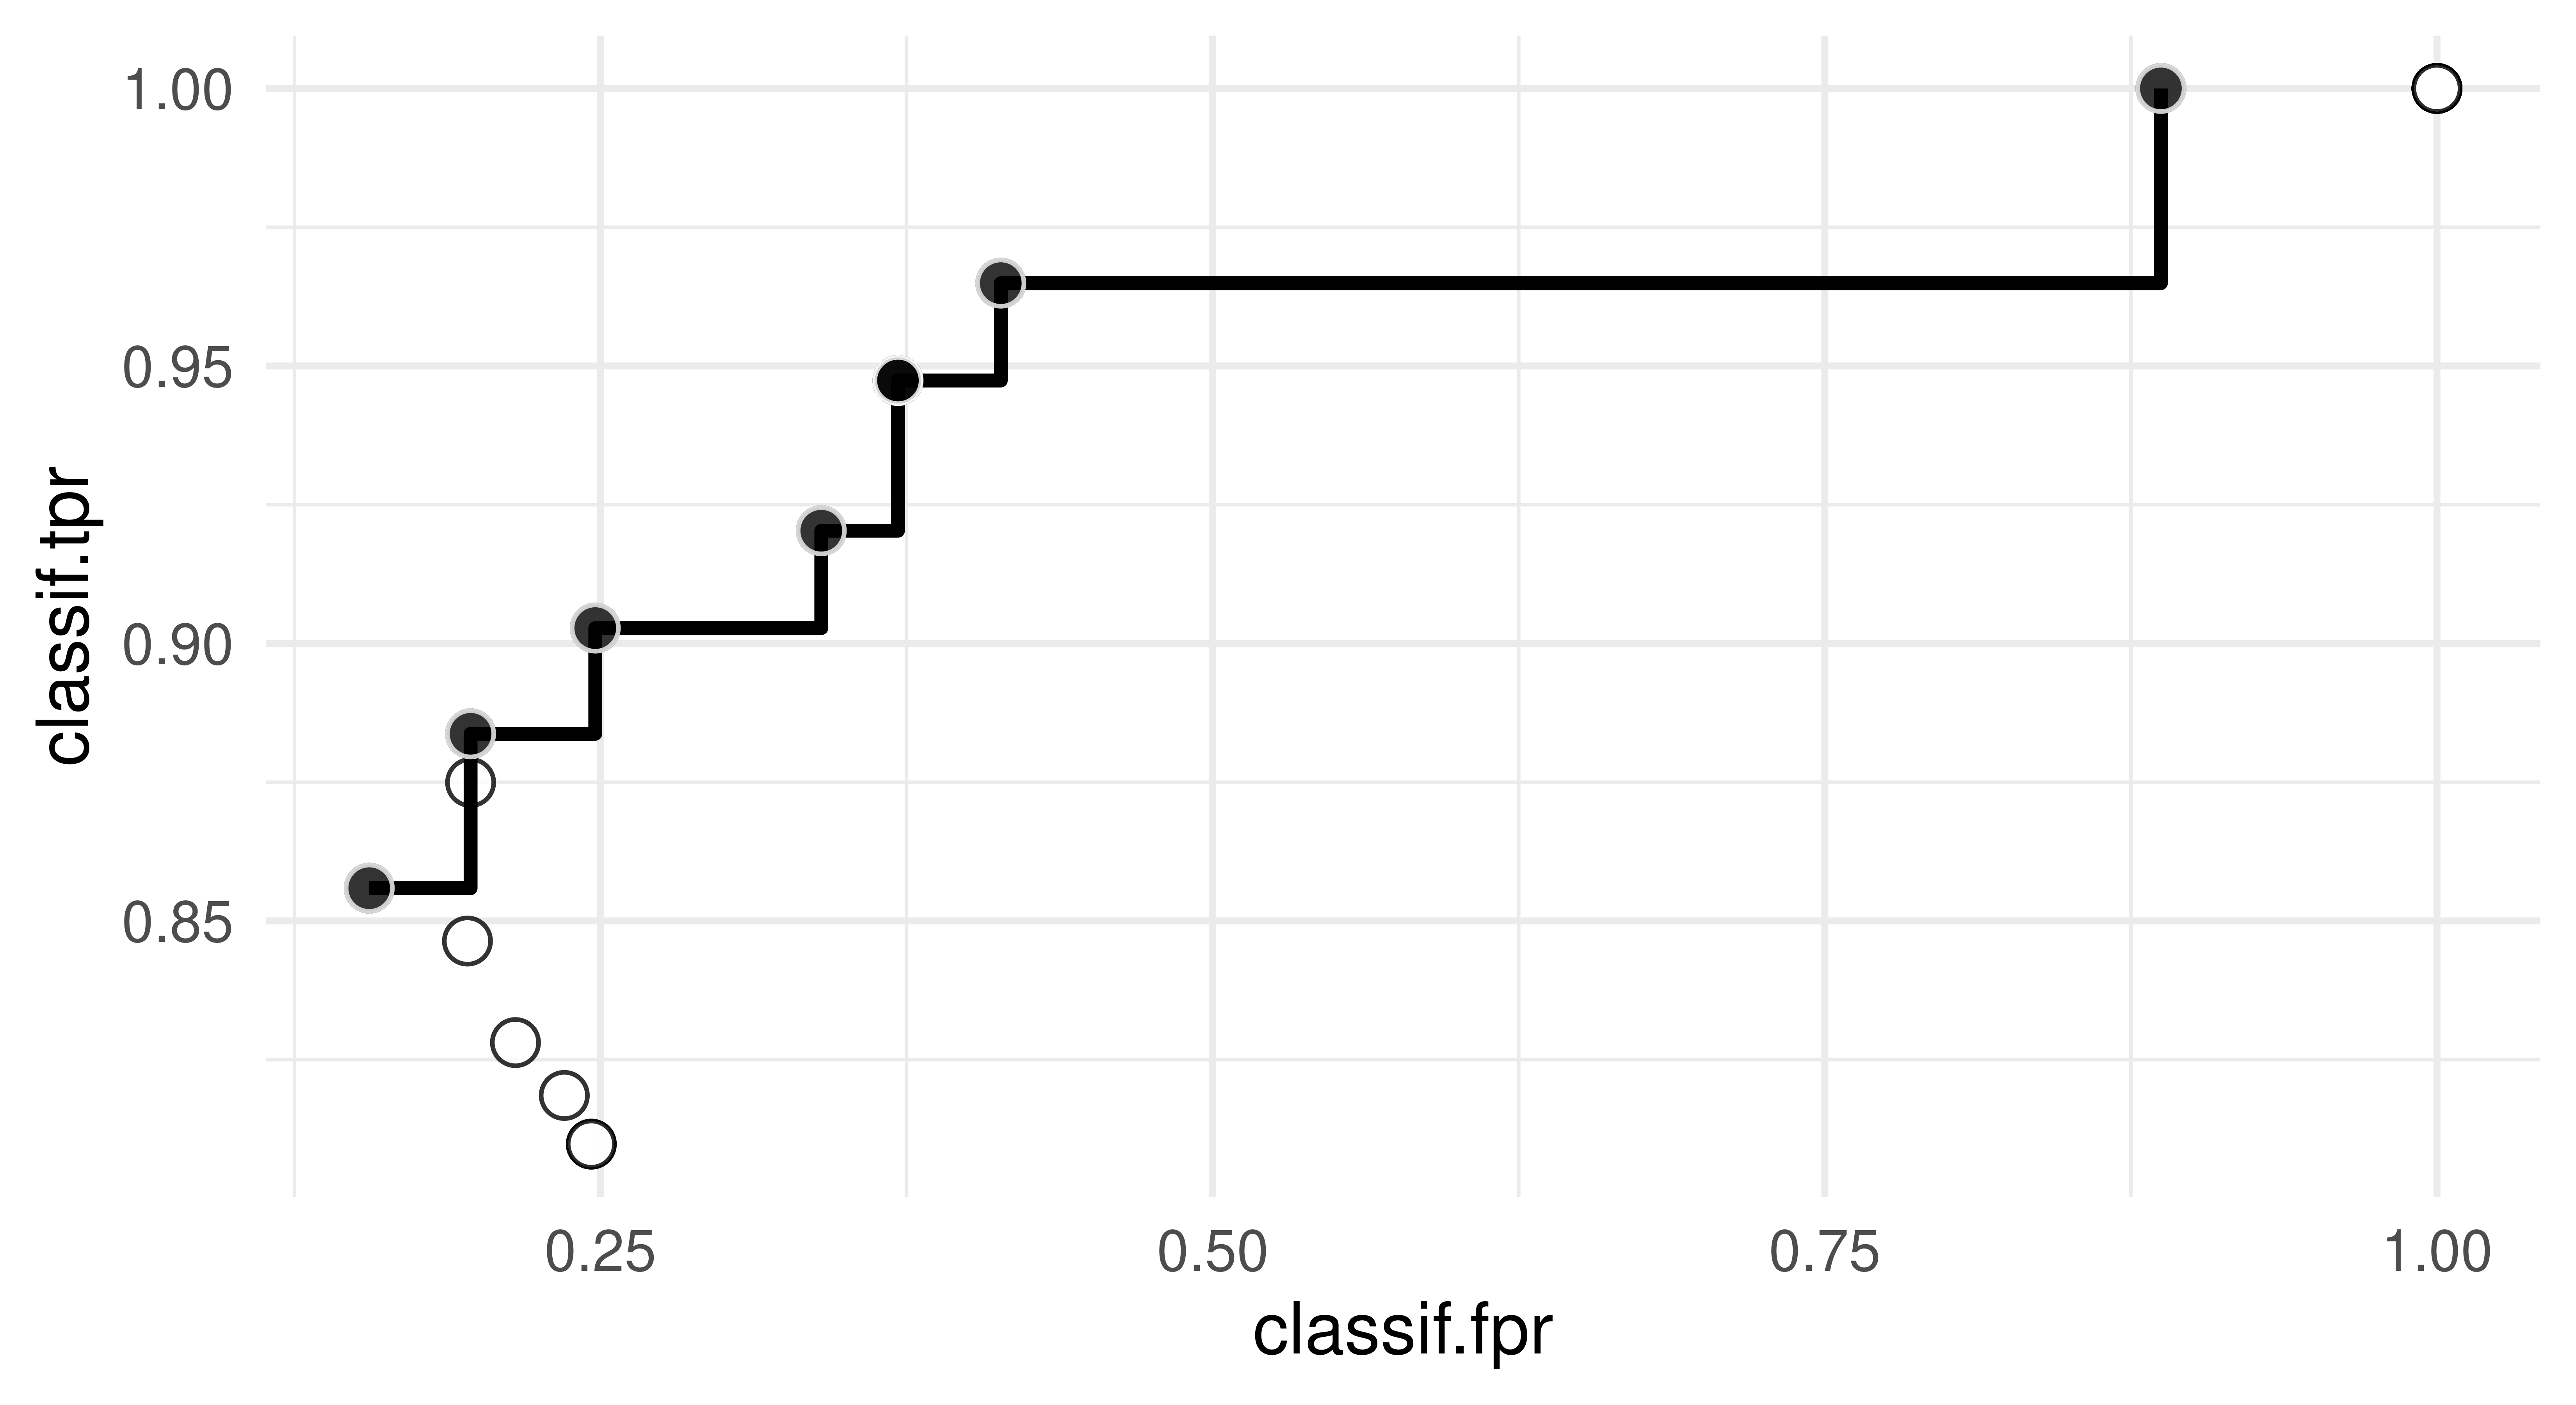 Scatter plot with classif.tpr on y-axis (between 0.75 and 1.00) and classif.fpr on x-axis (between 0.2 and 1.0). The Pareto front is shown as the set of points at roughly (0.23, 0.85), (0.24, 0.88), (0.25, 0.91), (0.30, 0.93), (0.35, 0.95), (0.40, 0.96), (0.8, 1.00).